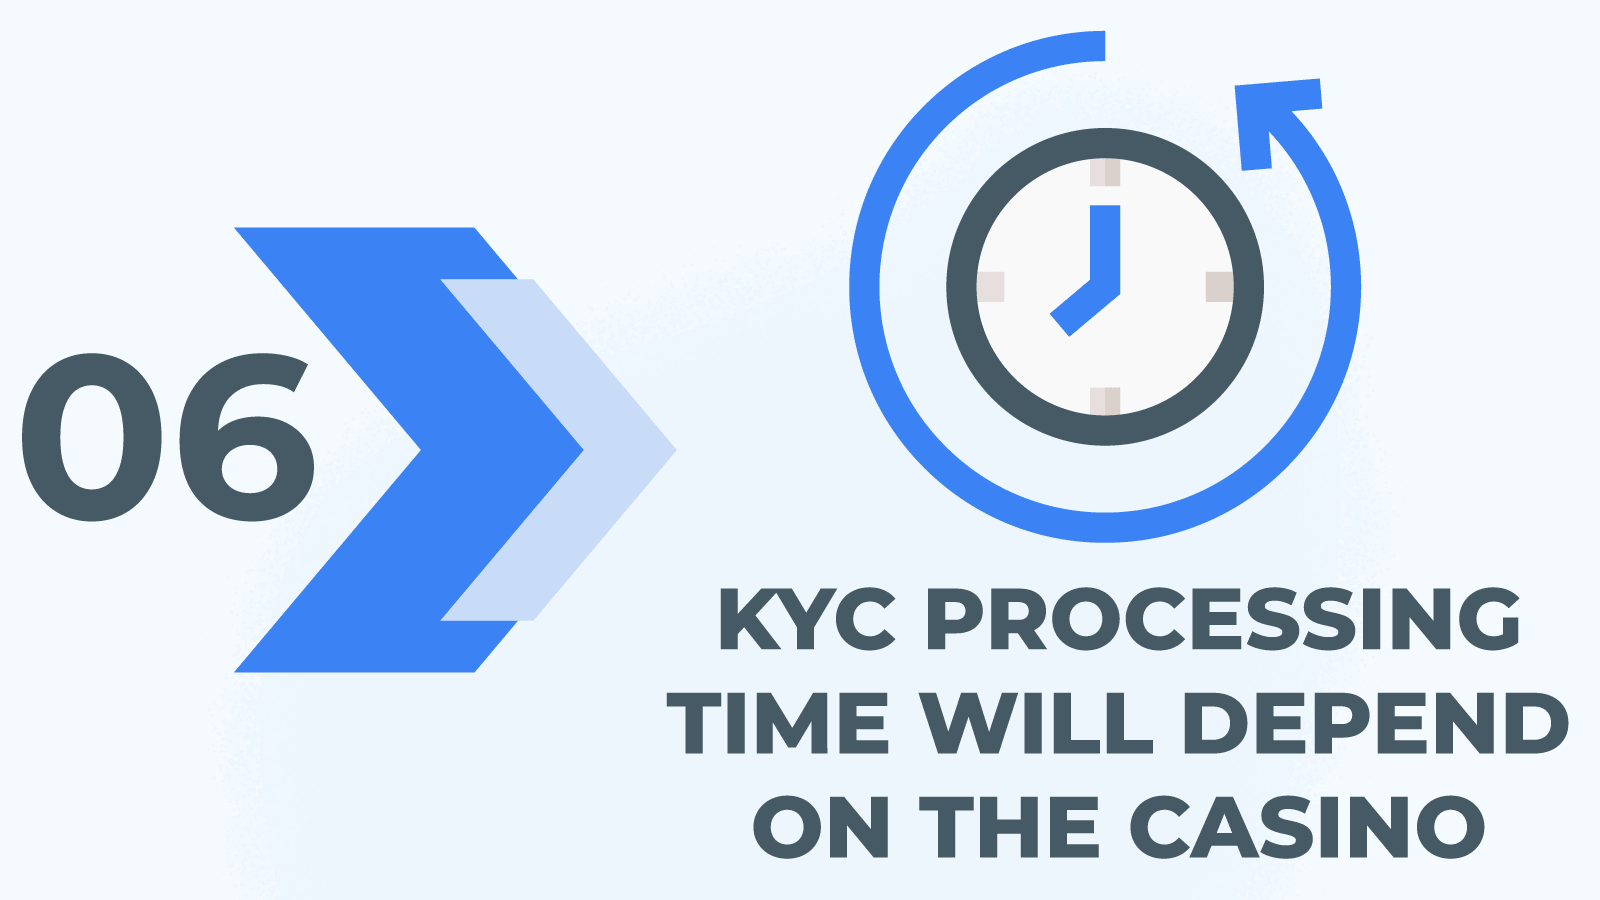 Step 6 - KYC processing time will depend on the casino